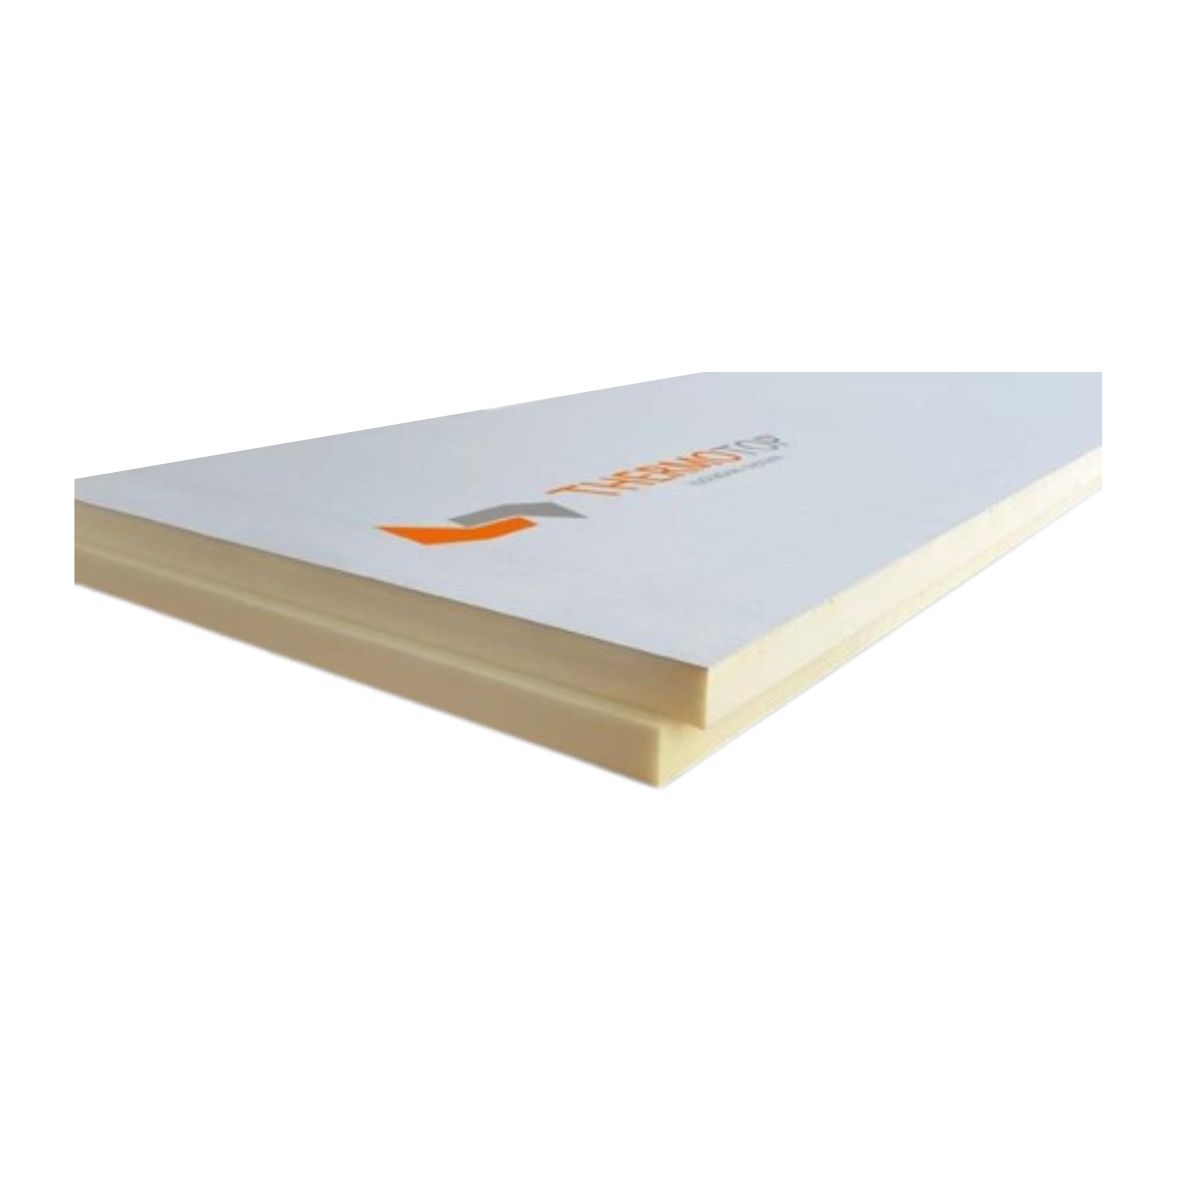 PIR Thermal insulation boards - Thermotop thermal insulation board Toboard PIR BV-BV 30 x 120 x 2400 mm, https:maxbau.ro